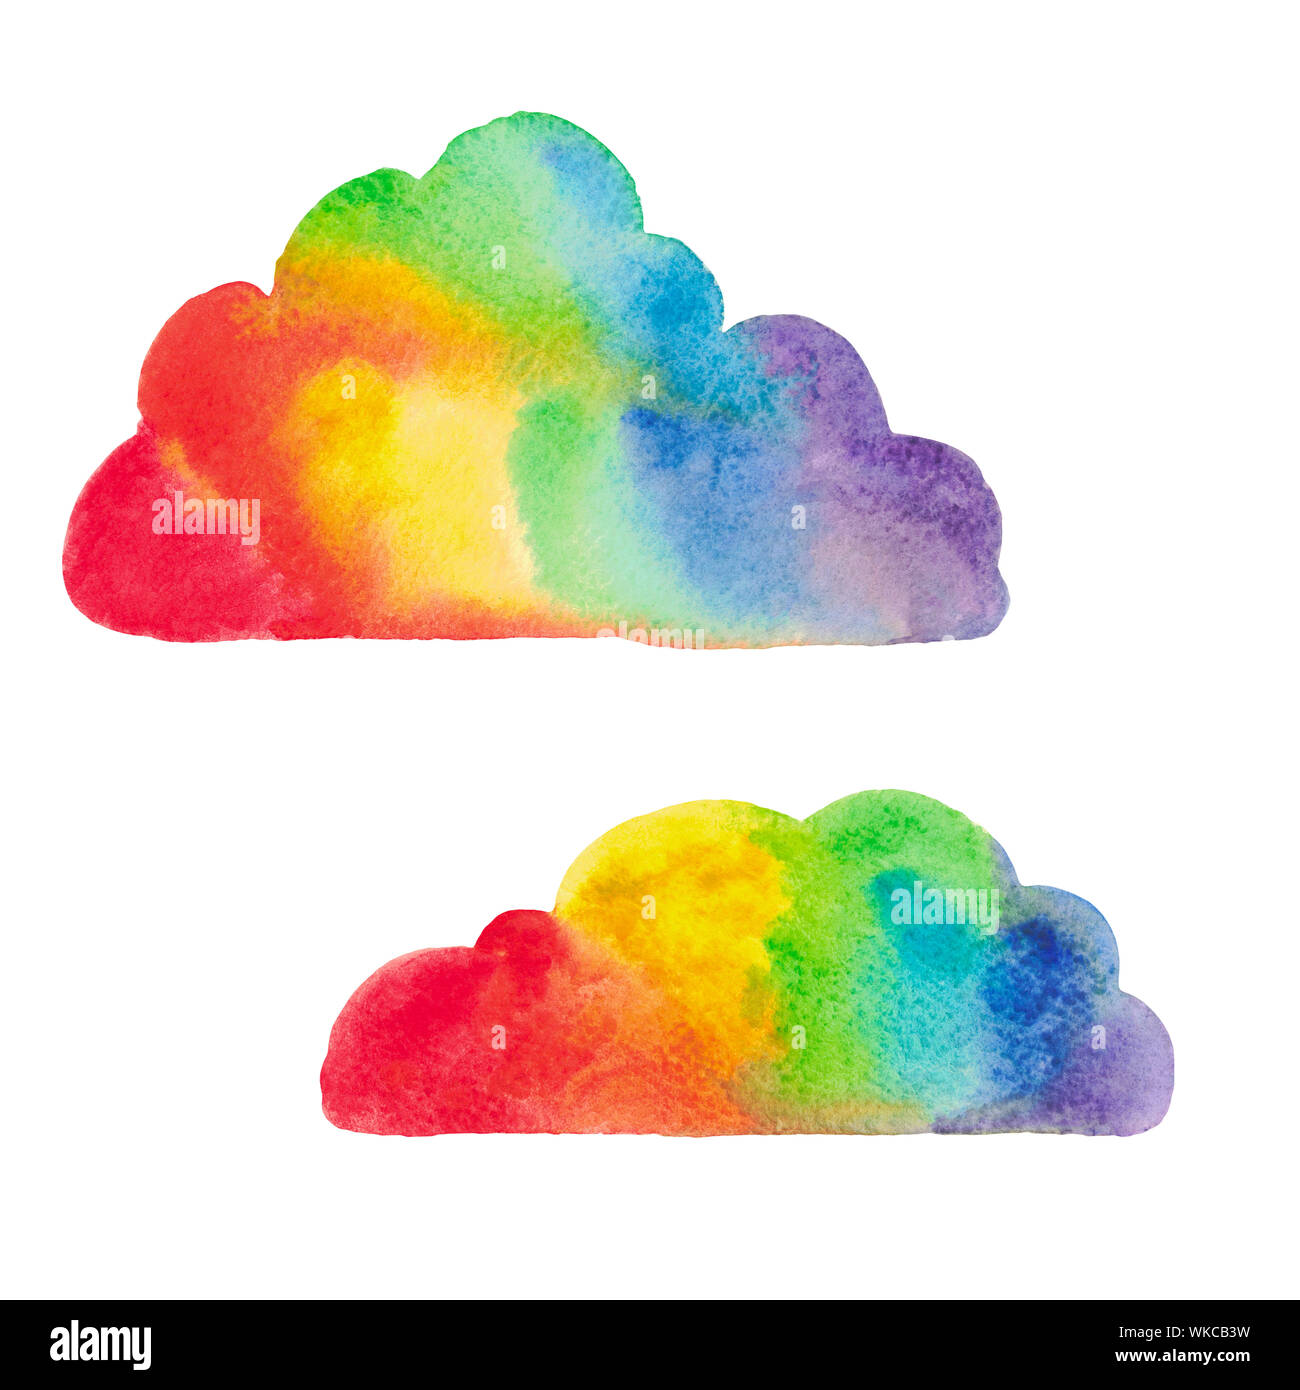 Illustration of hand painted watercolor. Decorative rainbow clouds element for Wallpaper fabric design poster paper compositions Stock Photo